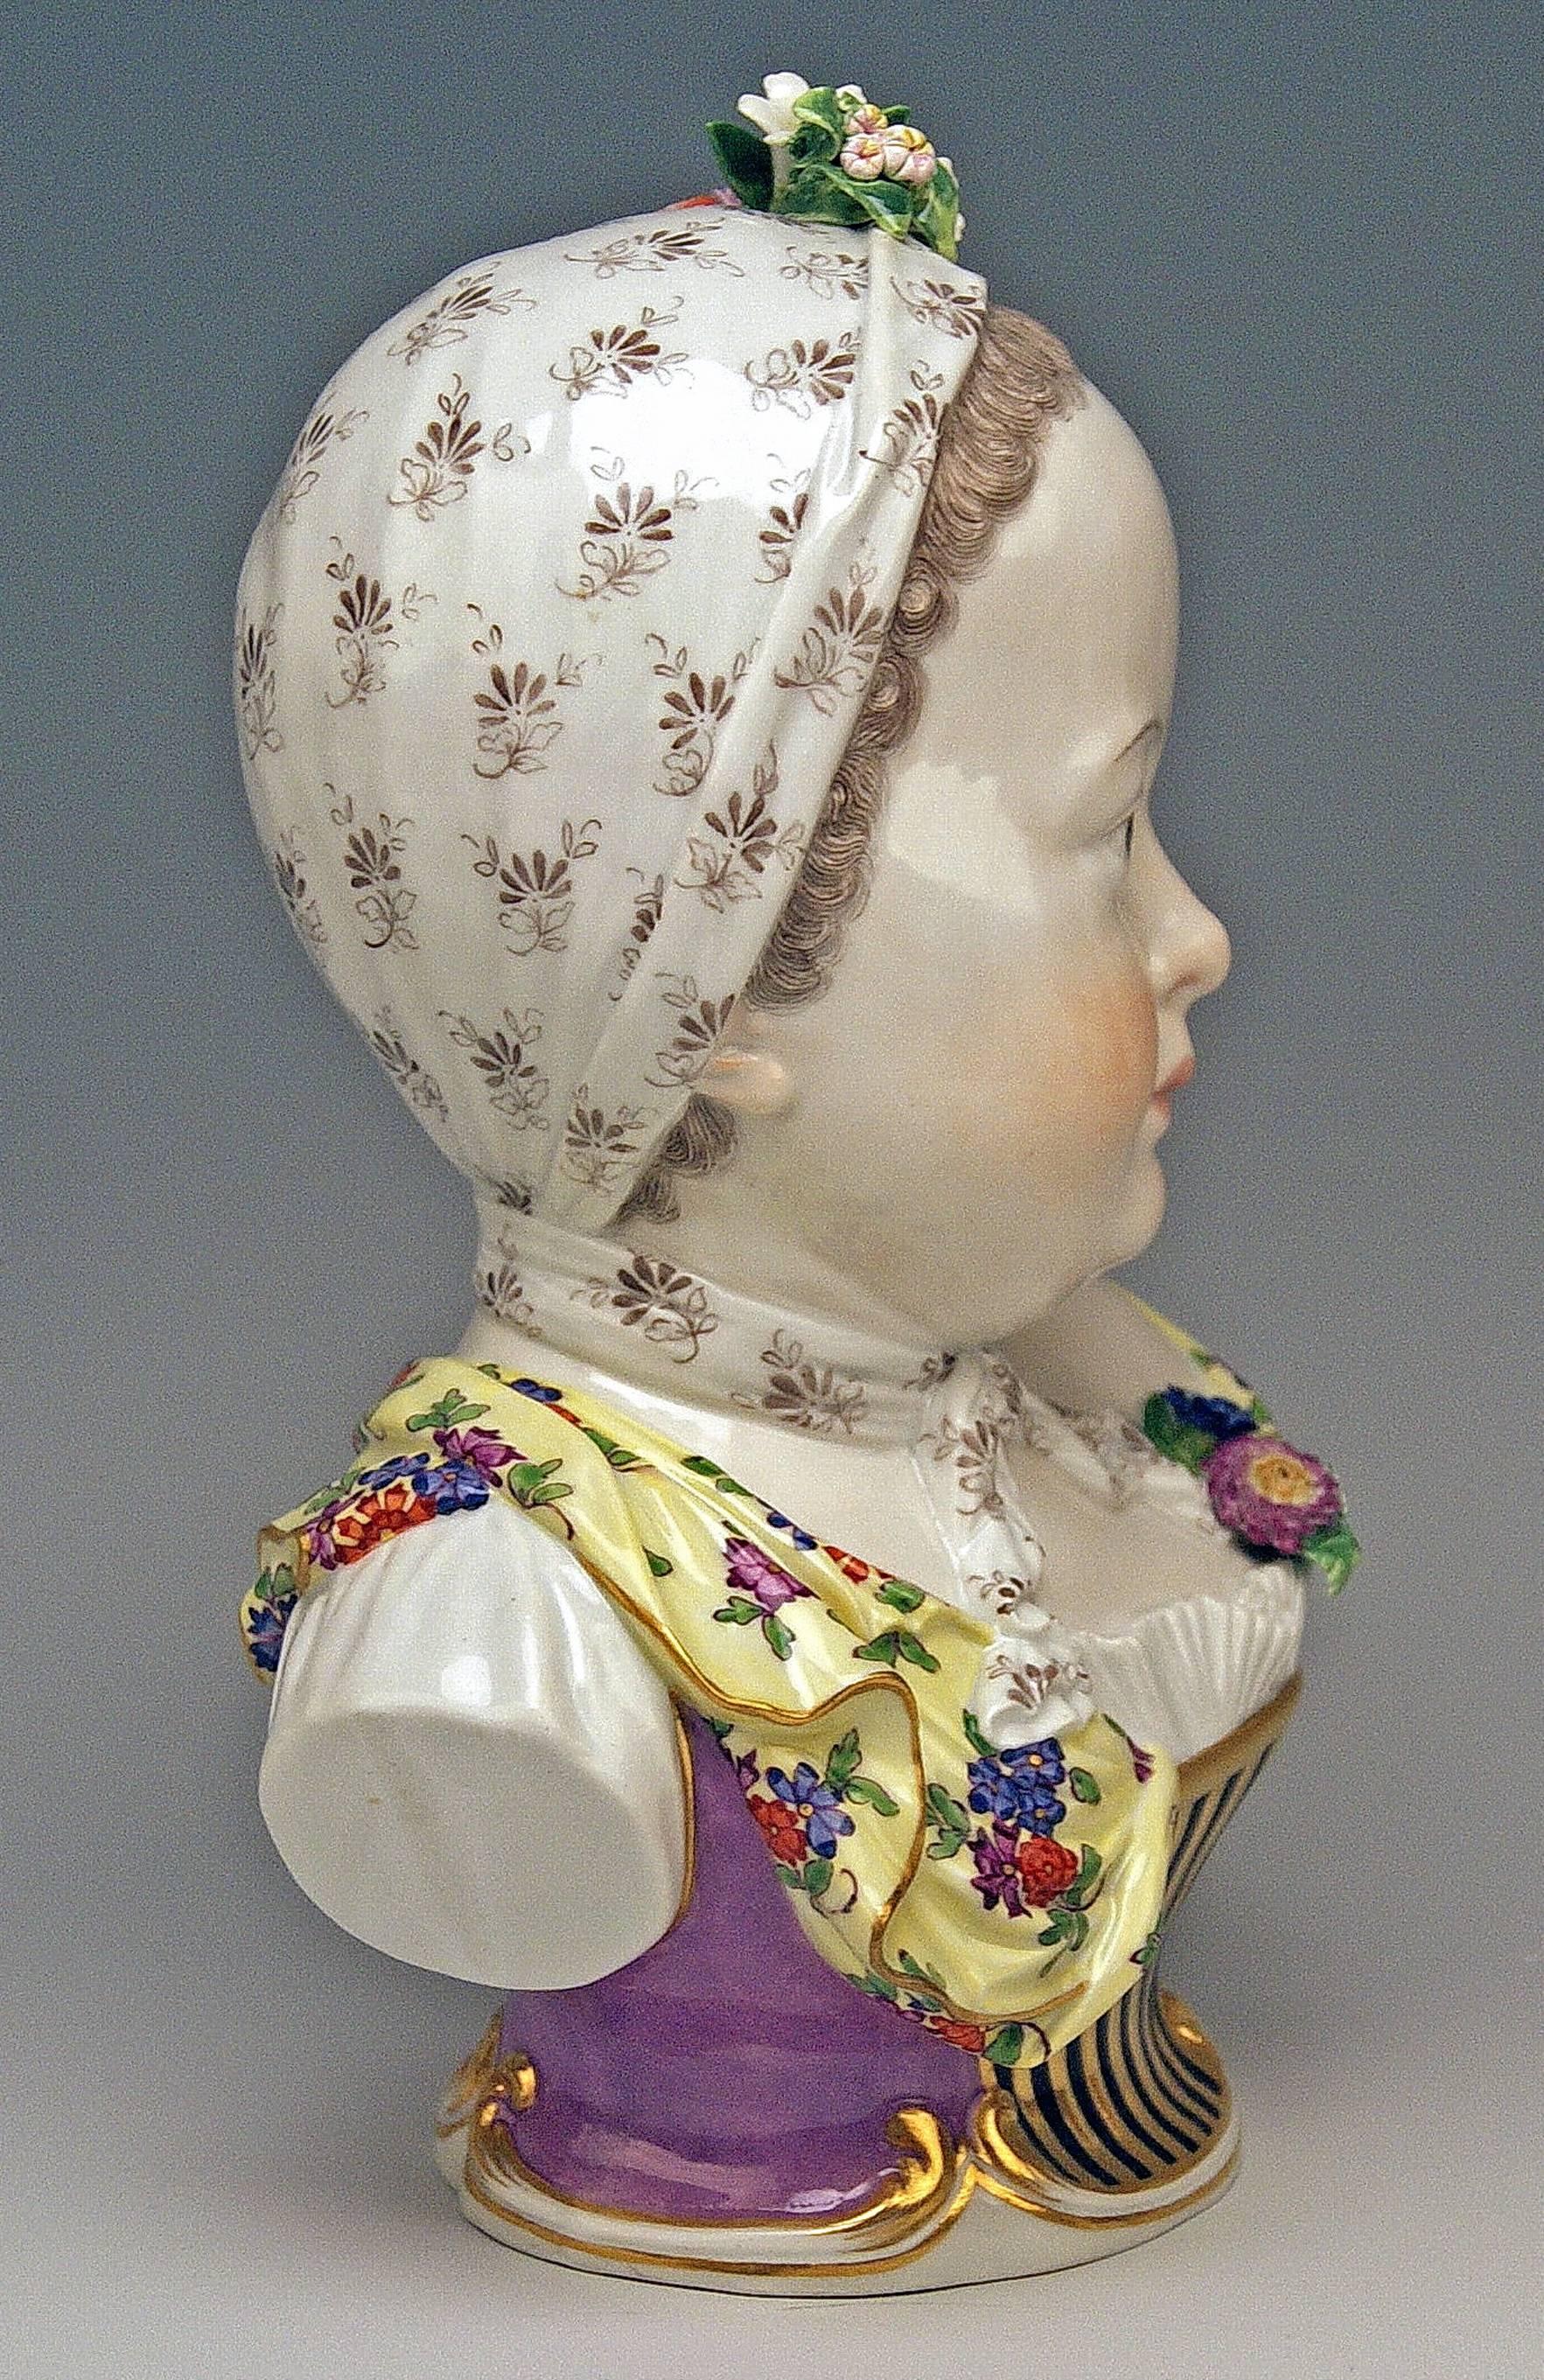 Meissen stunning item of lovely appearance: Bust of a girl (a bourbon princess)
Model 2744

Measures:
height 10.23 inches (26.0 cm)
width 6.69 inches (17.0 cm)
depth 4.33 inches (11.0 cm)

Manufactory: Meissen
Hallmarked: Blue Meissen Sword